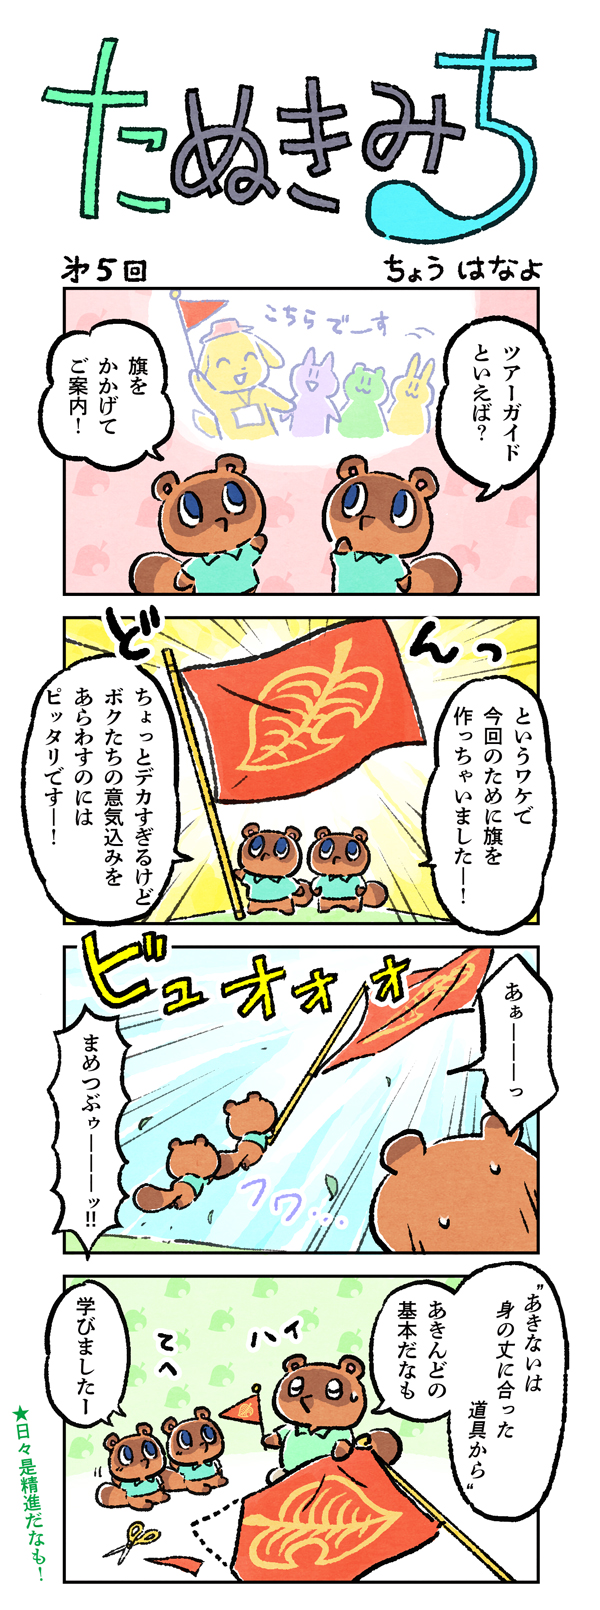 New Entry The Entire Animal Crossing New Horizons Nook Tails Comic Series With Translations Animal Crossing World